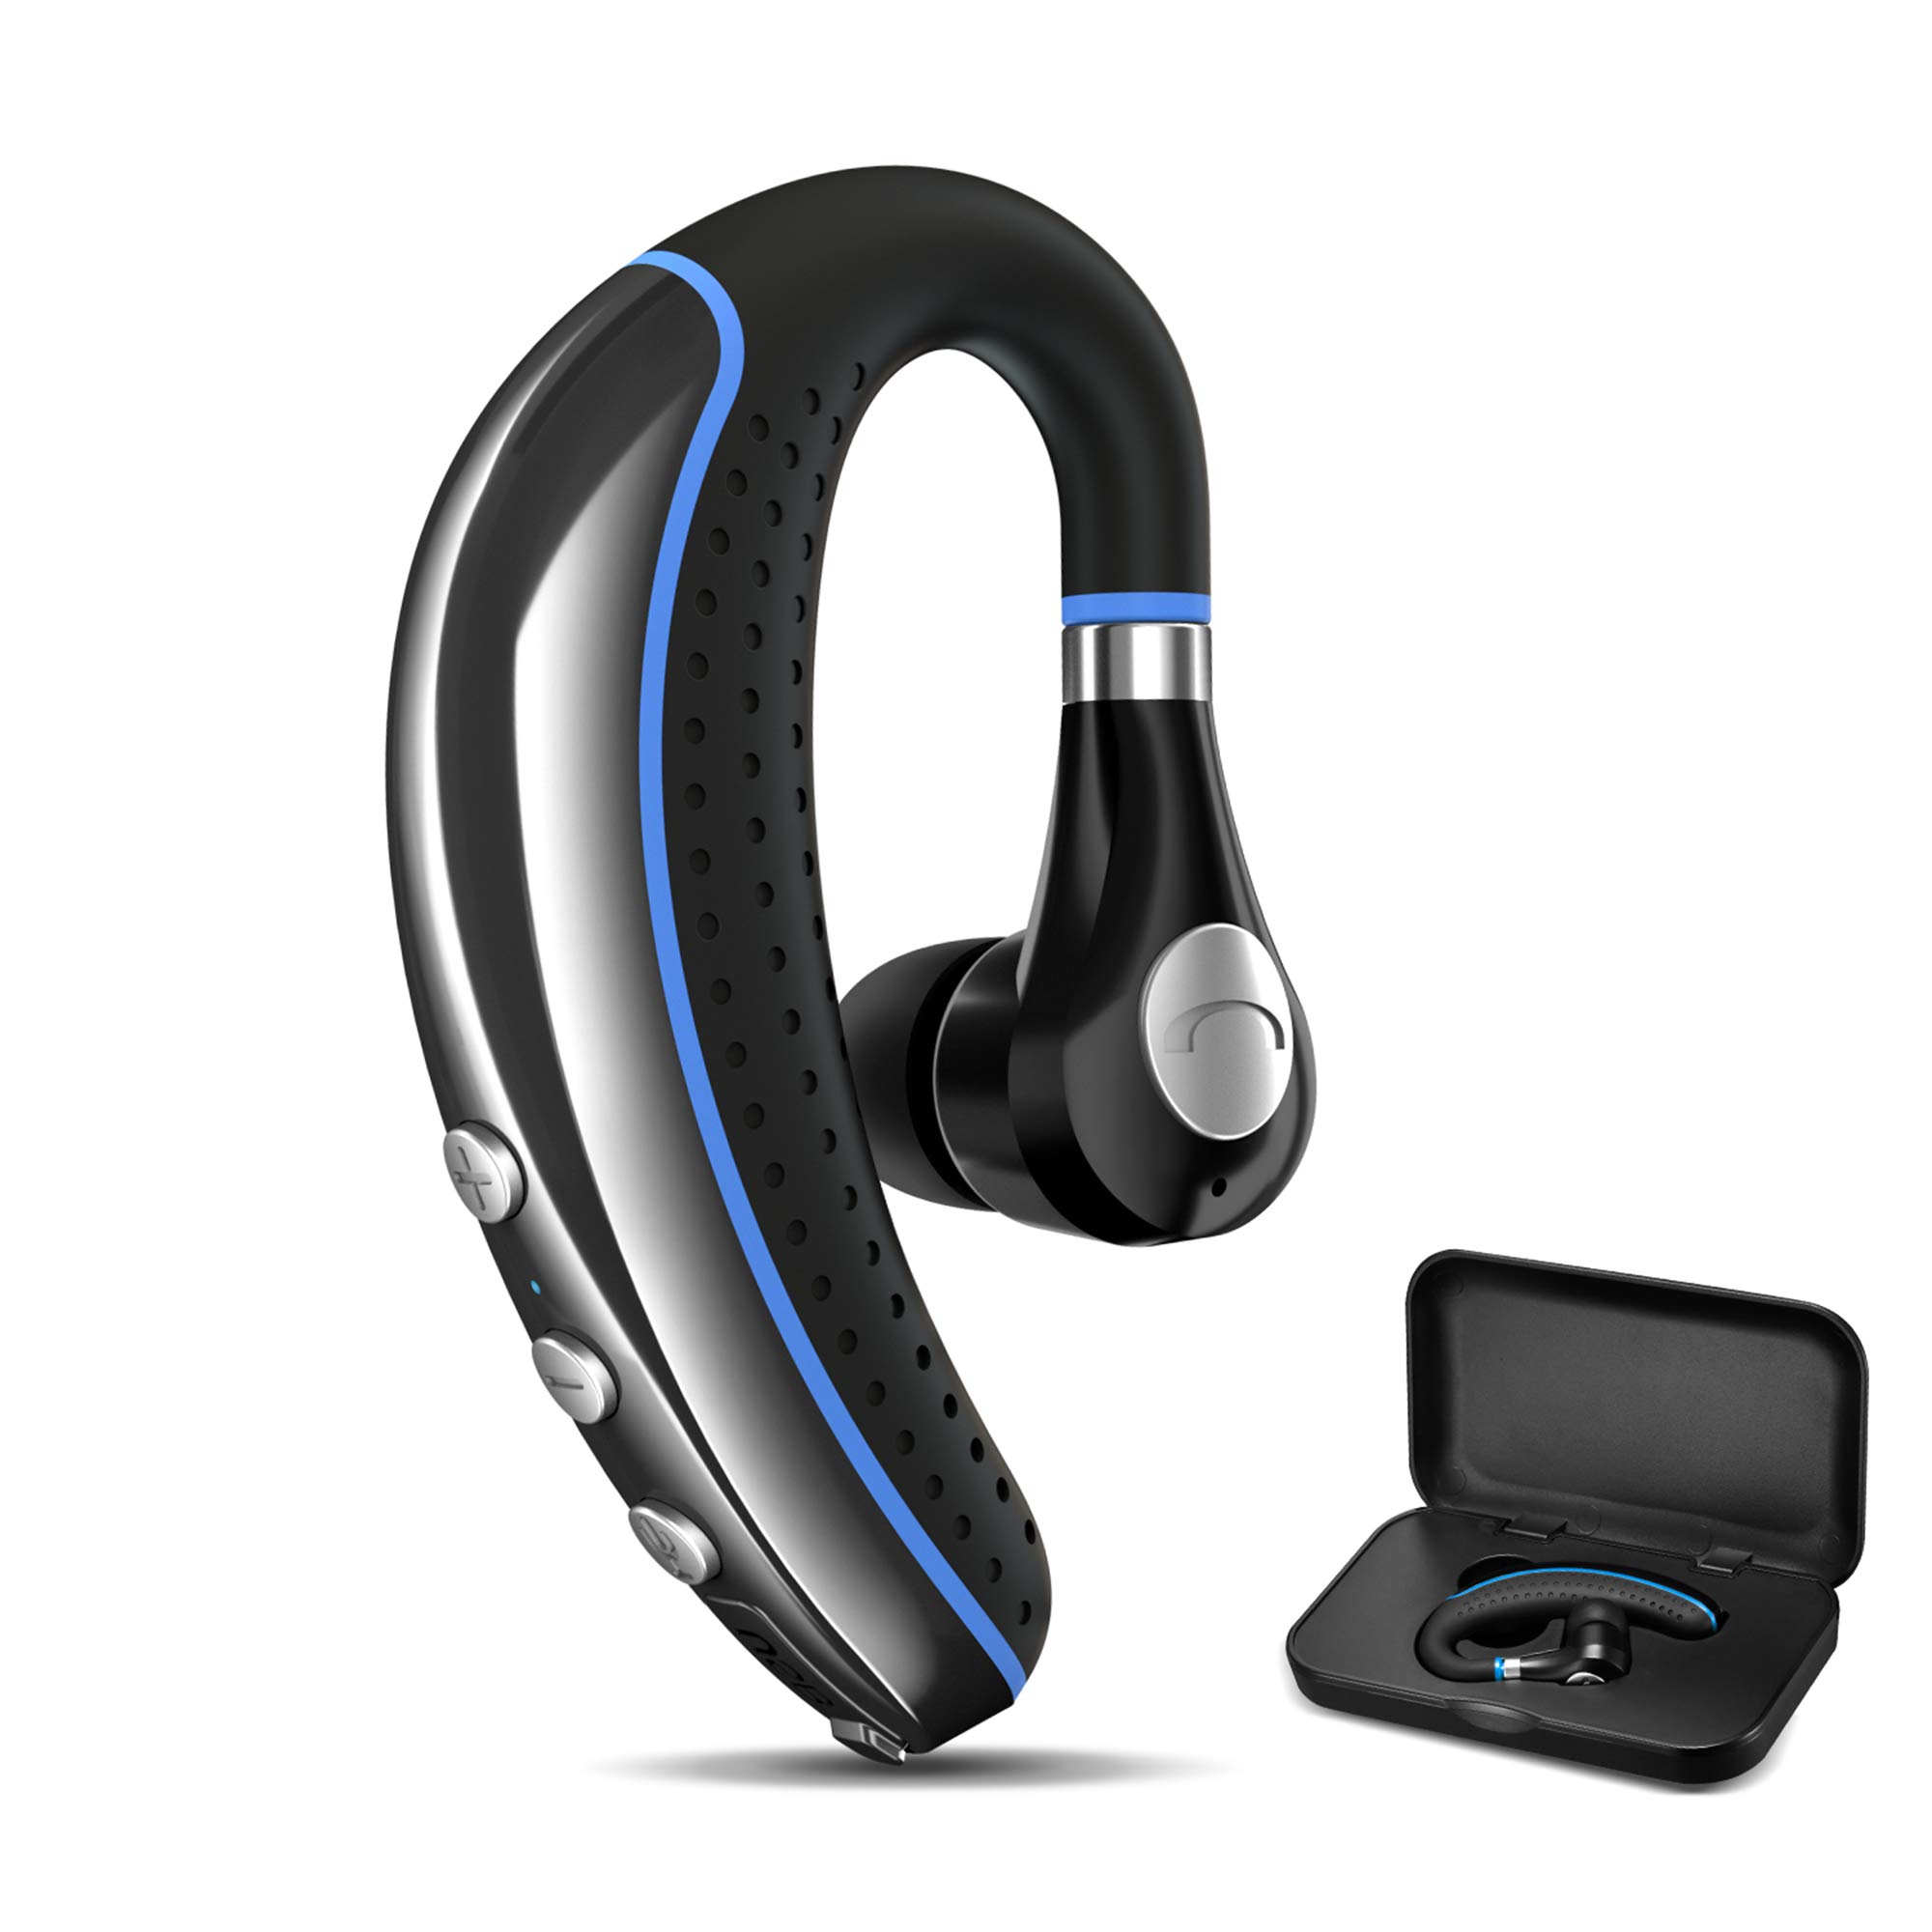 Make sure the Bluetooth headset is properly paired with the computer or device.
 Ensure the Bluetooth connection is not being interfered with by other devices or signals.